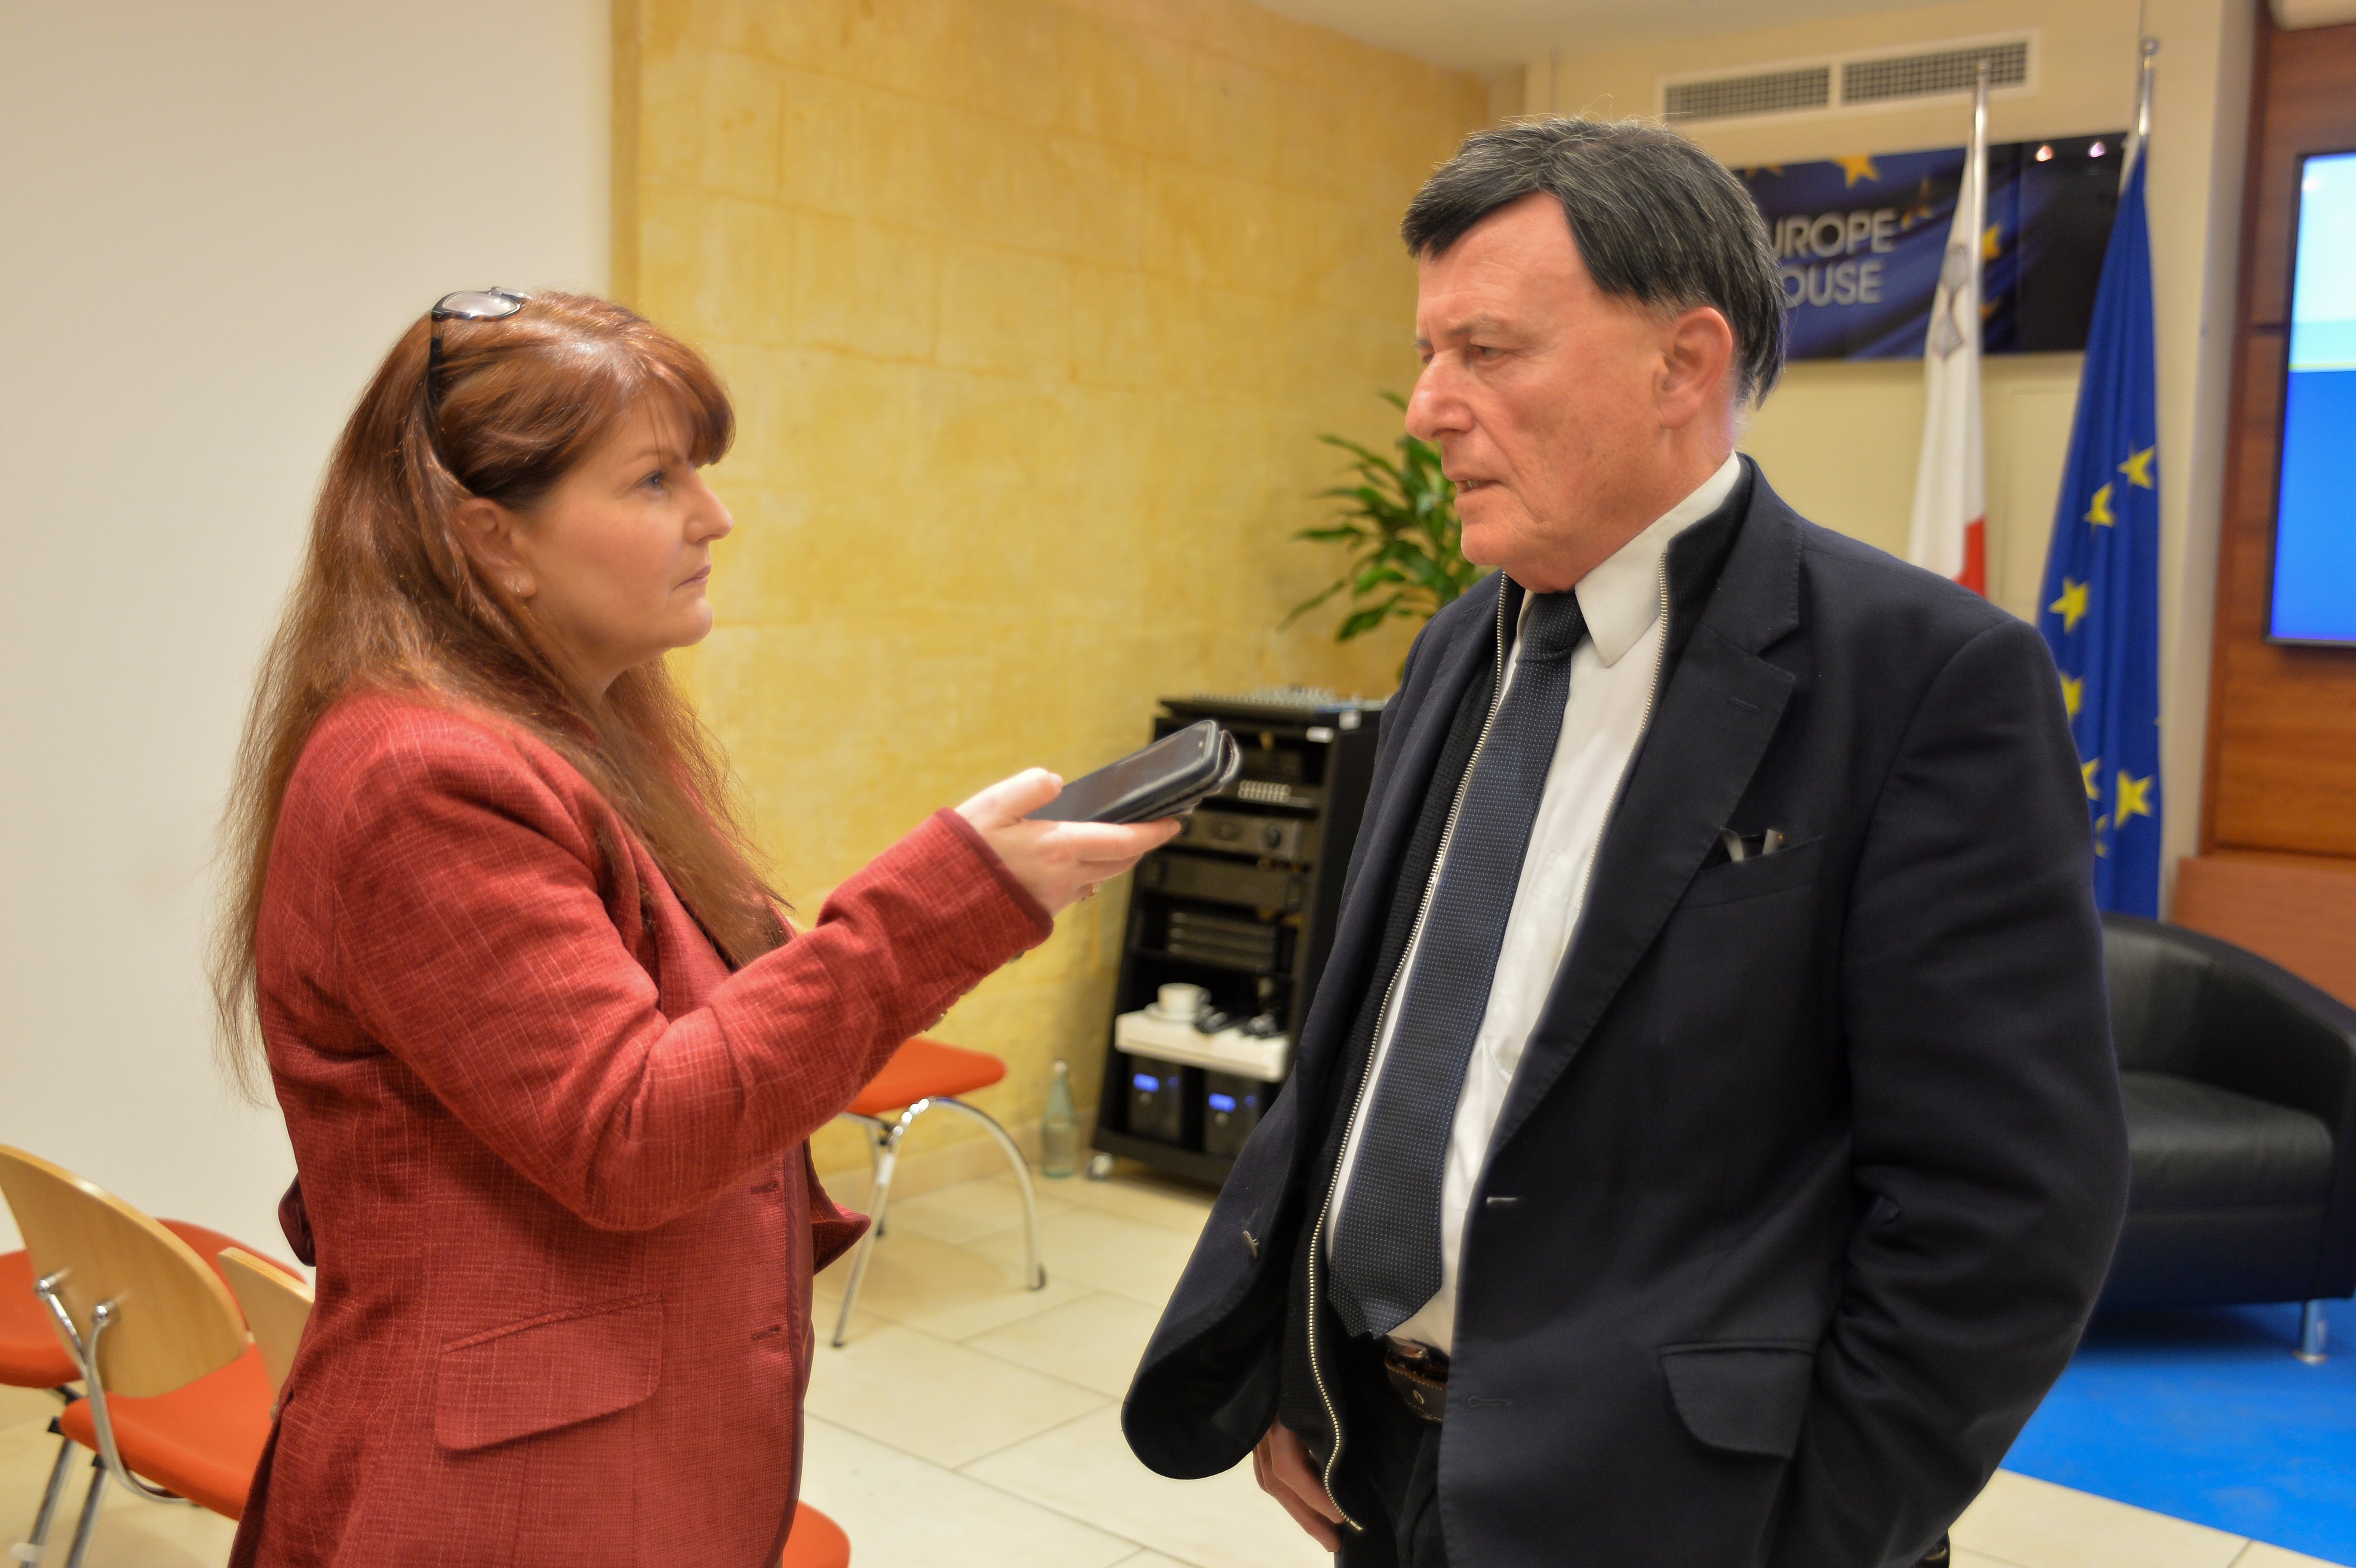 Press Officer Anna Zammit Vella interviewing MEP Alfred Sant at Europe House